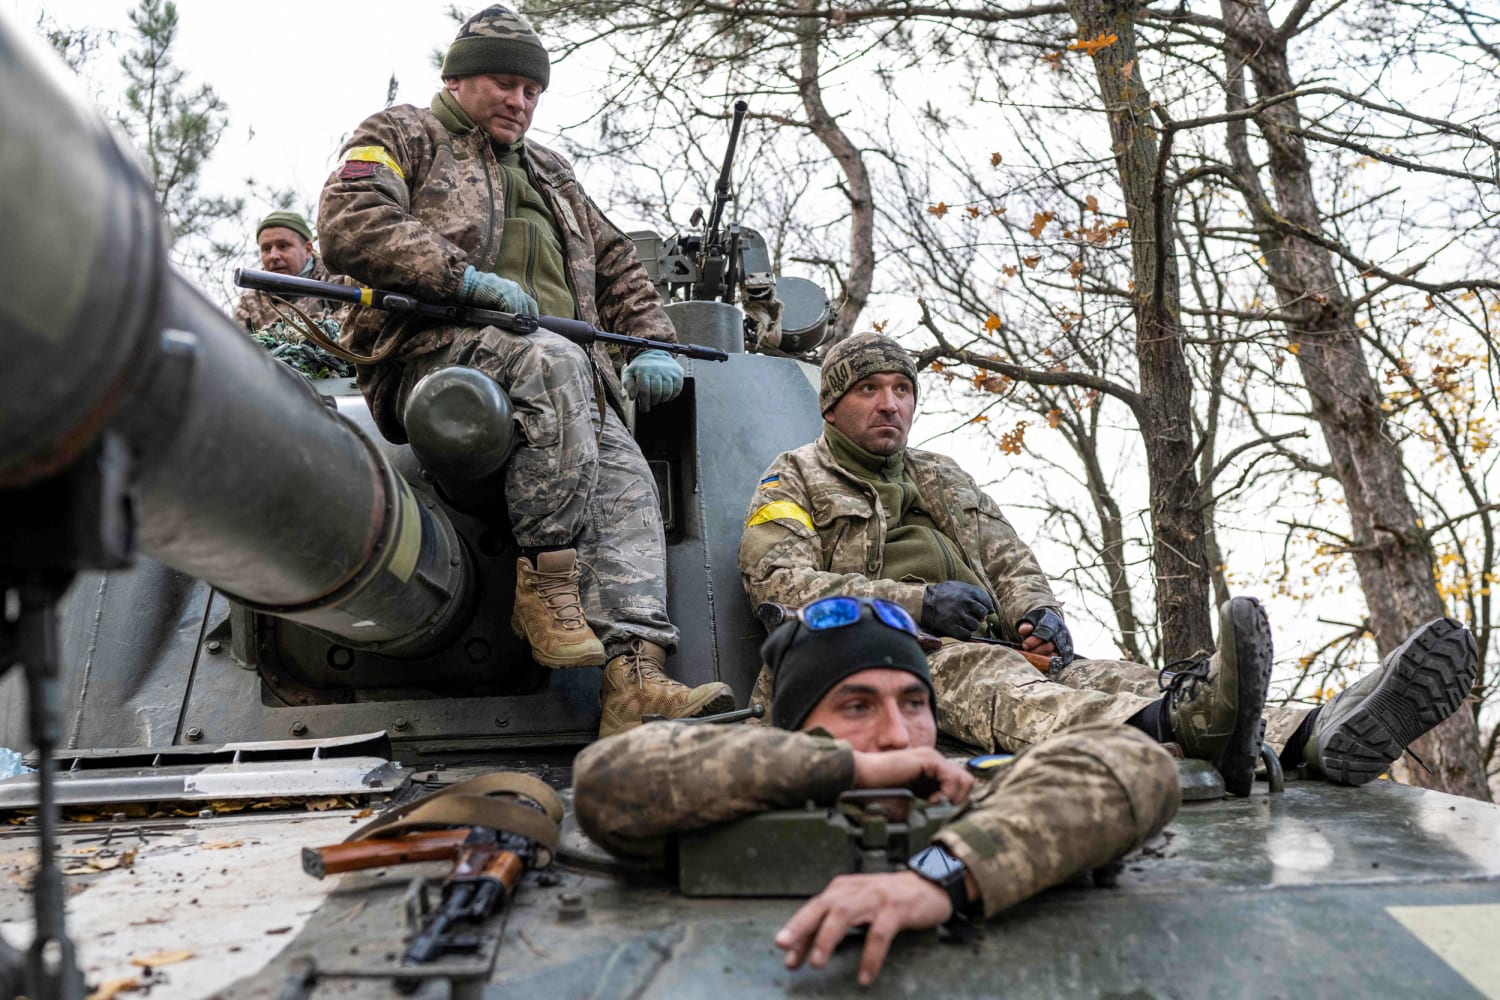 Retreat or a trap? Russia signals a surprise withdrawal from a key city,  but Ukrainians are wary